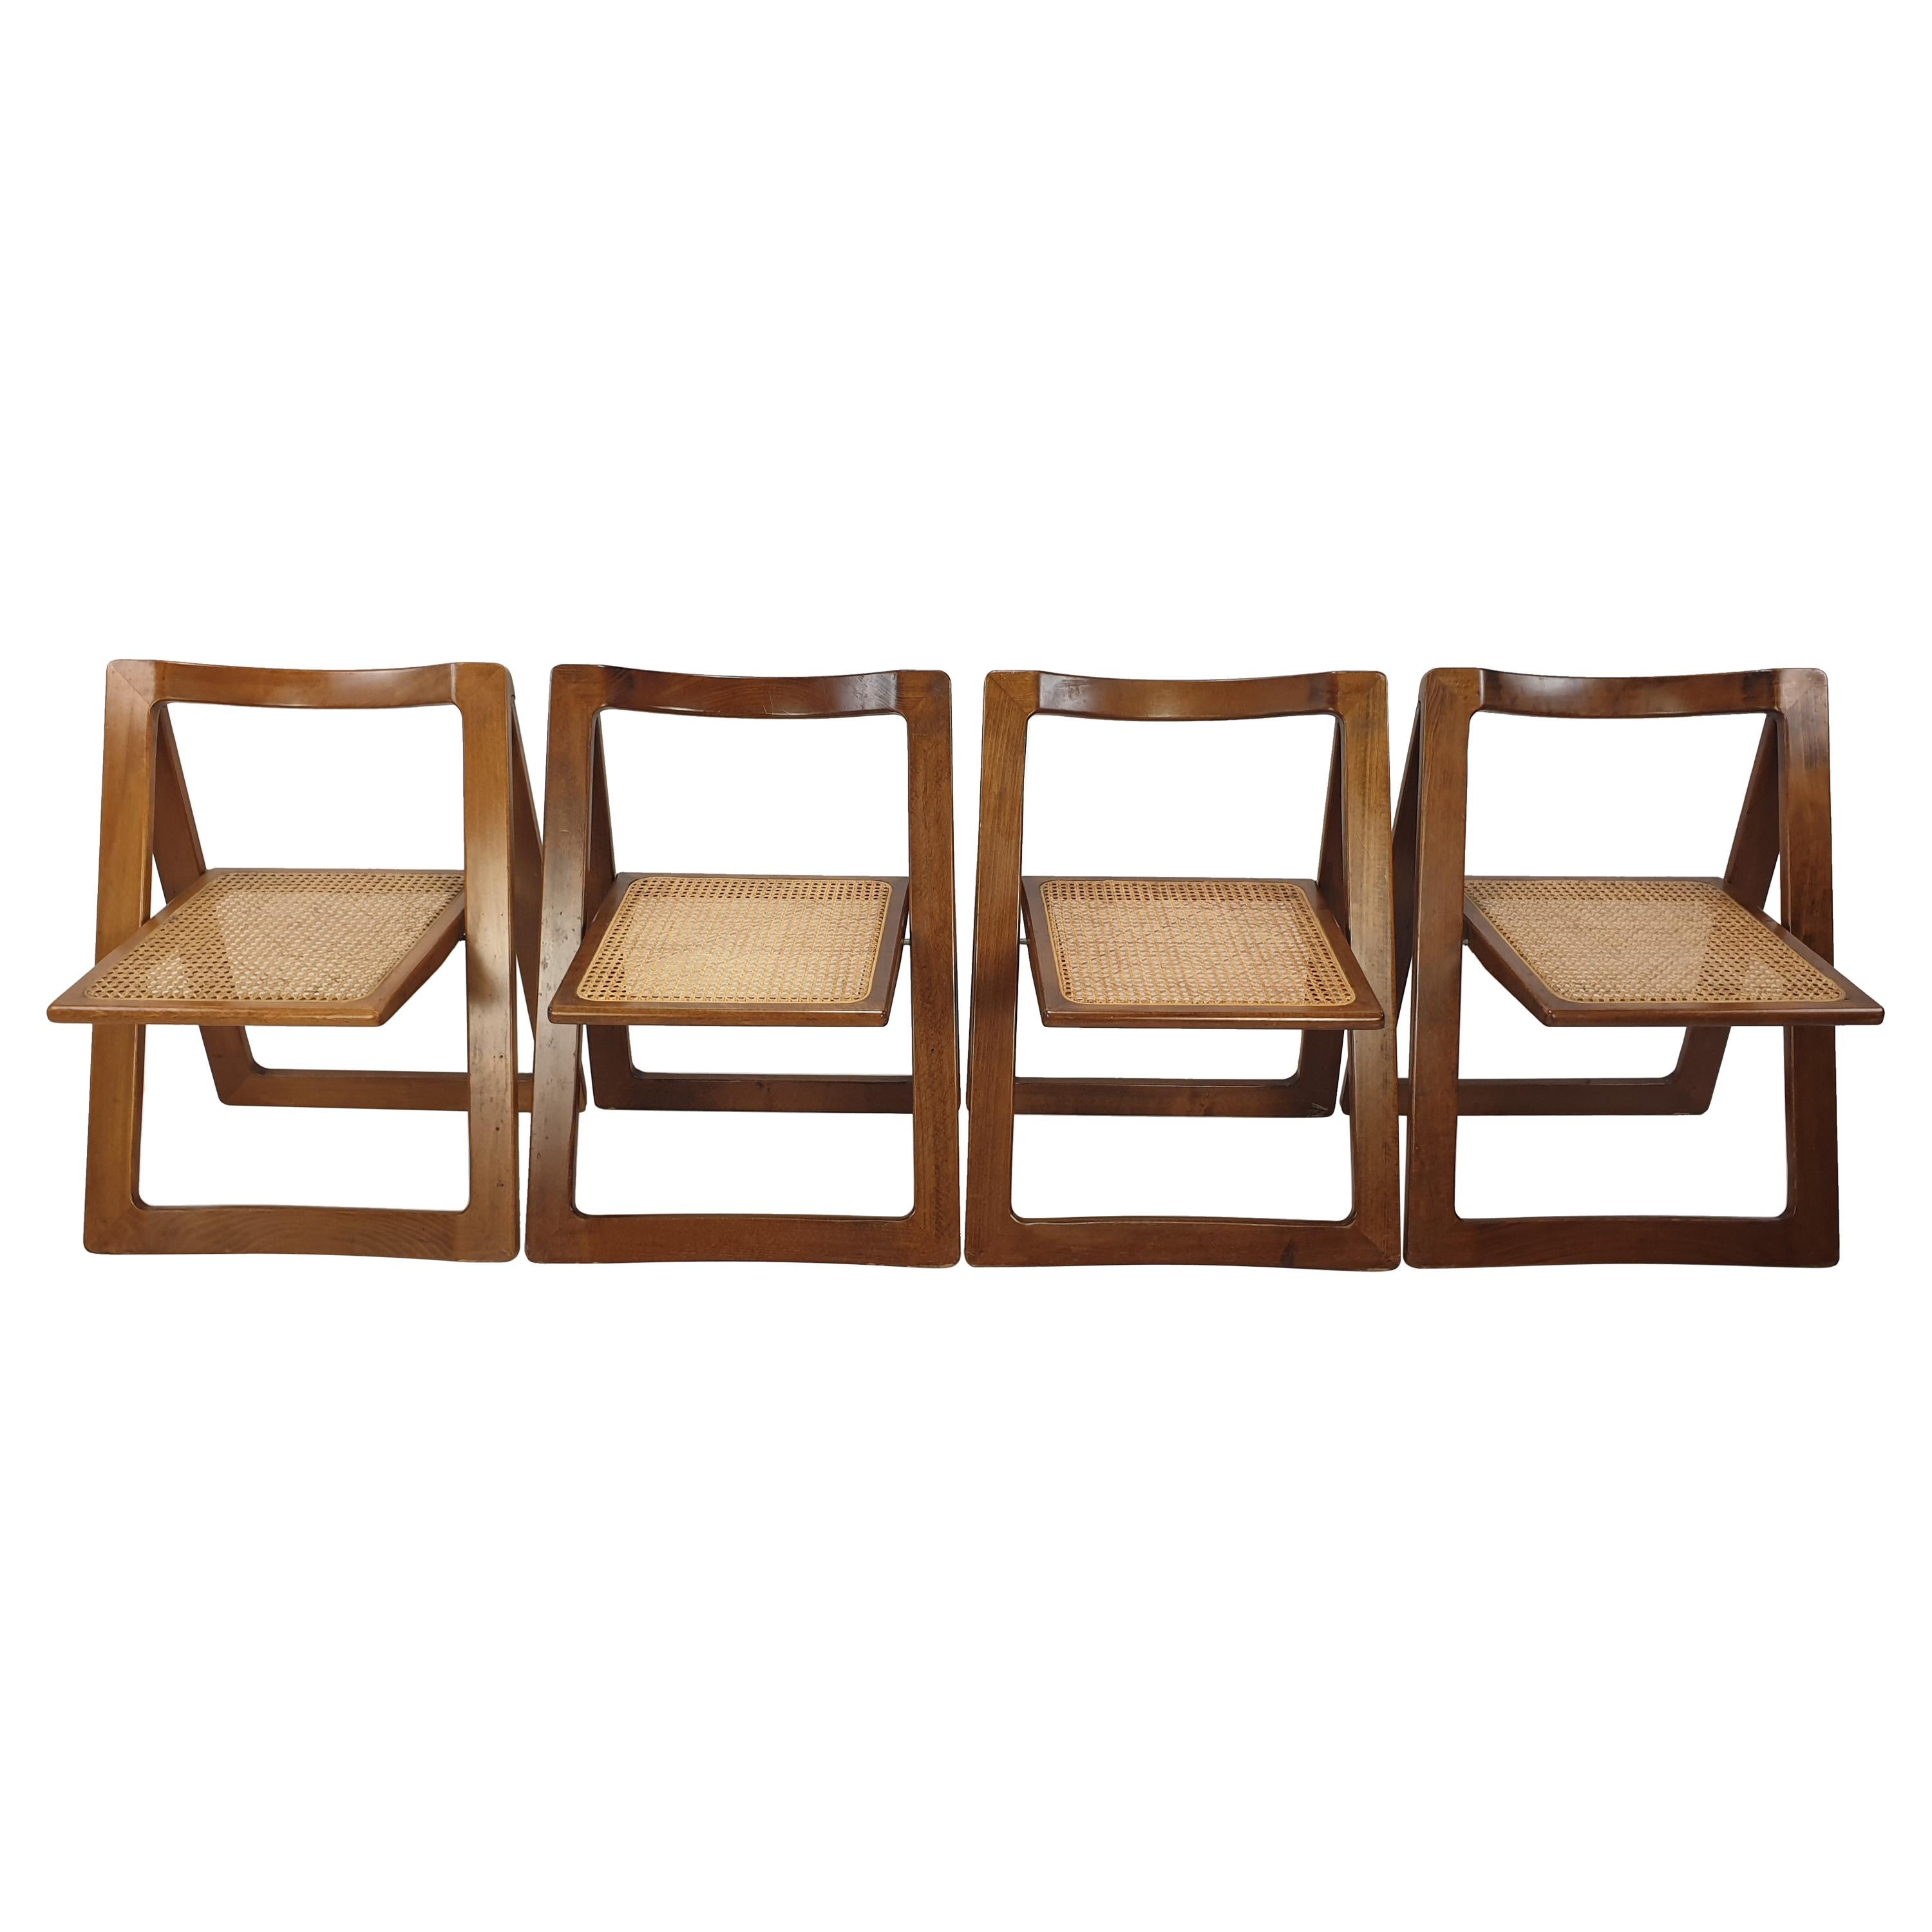 Mid-Century Set of 4 "Trieste" Chairs by Jacober & d'Aniello for Bazzani, 1960's